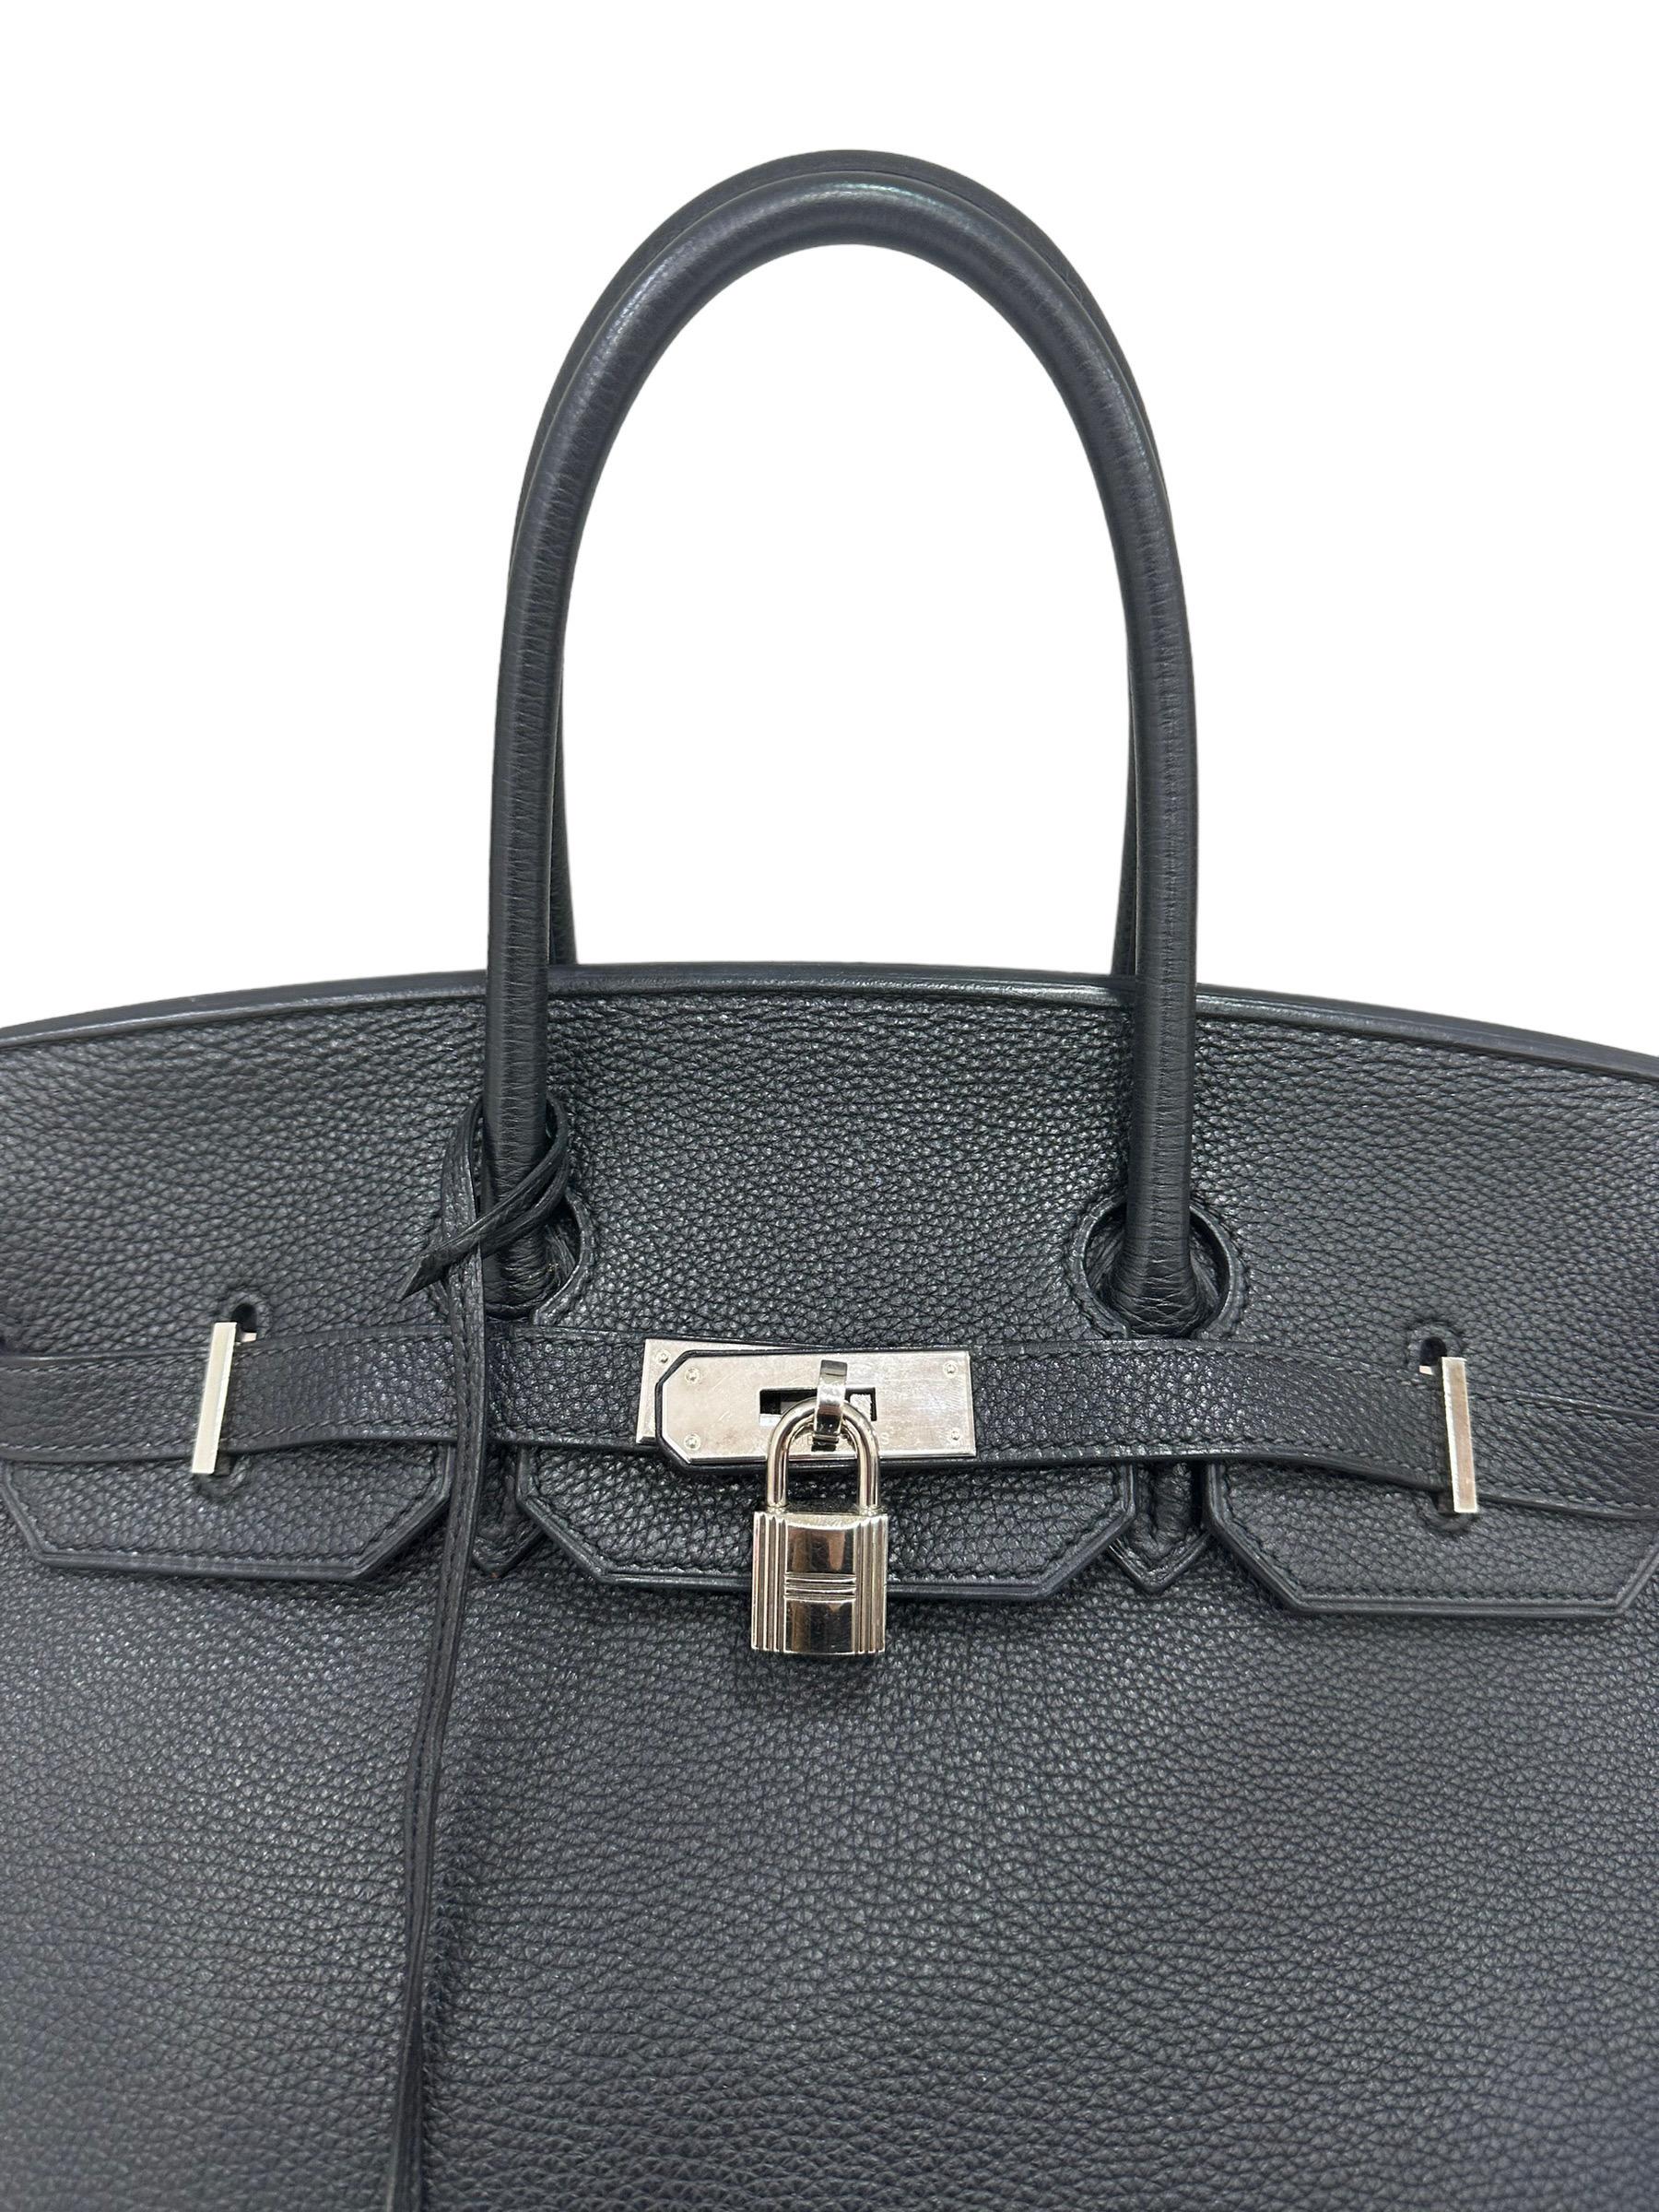 

Bag by Hermès, Birkin model, size 35, made in Togo leather, soft to the touch and with light veins, Plomb colour, equal to black. Equipped with the classic interlocking flap, with horizontal band closure, padlock and keys. Internally lined in the